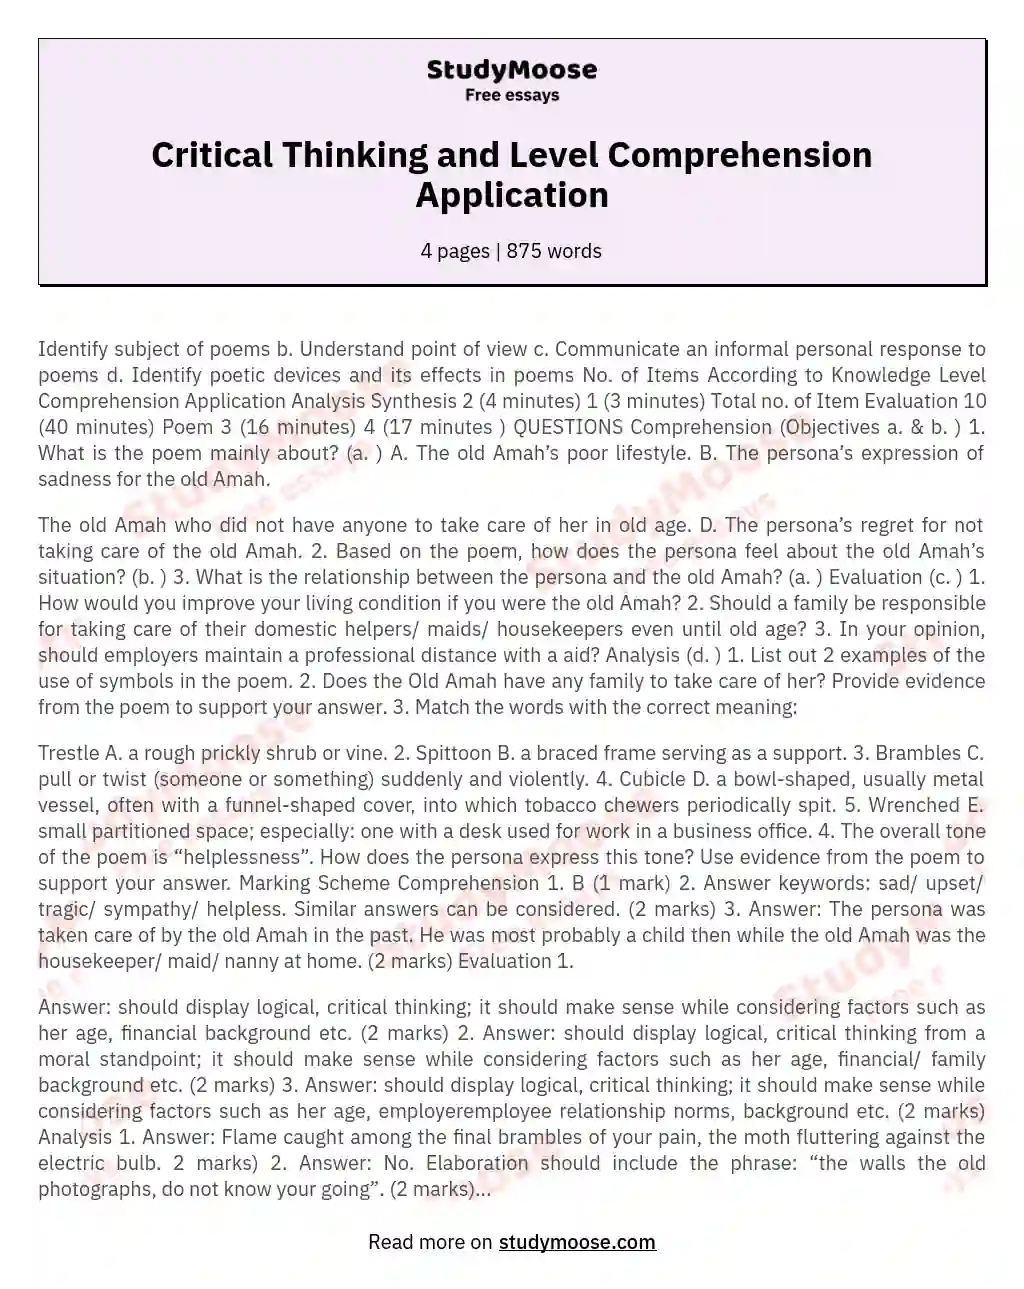 Critical Thinking and Level Comprehension Application essay